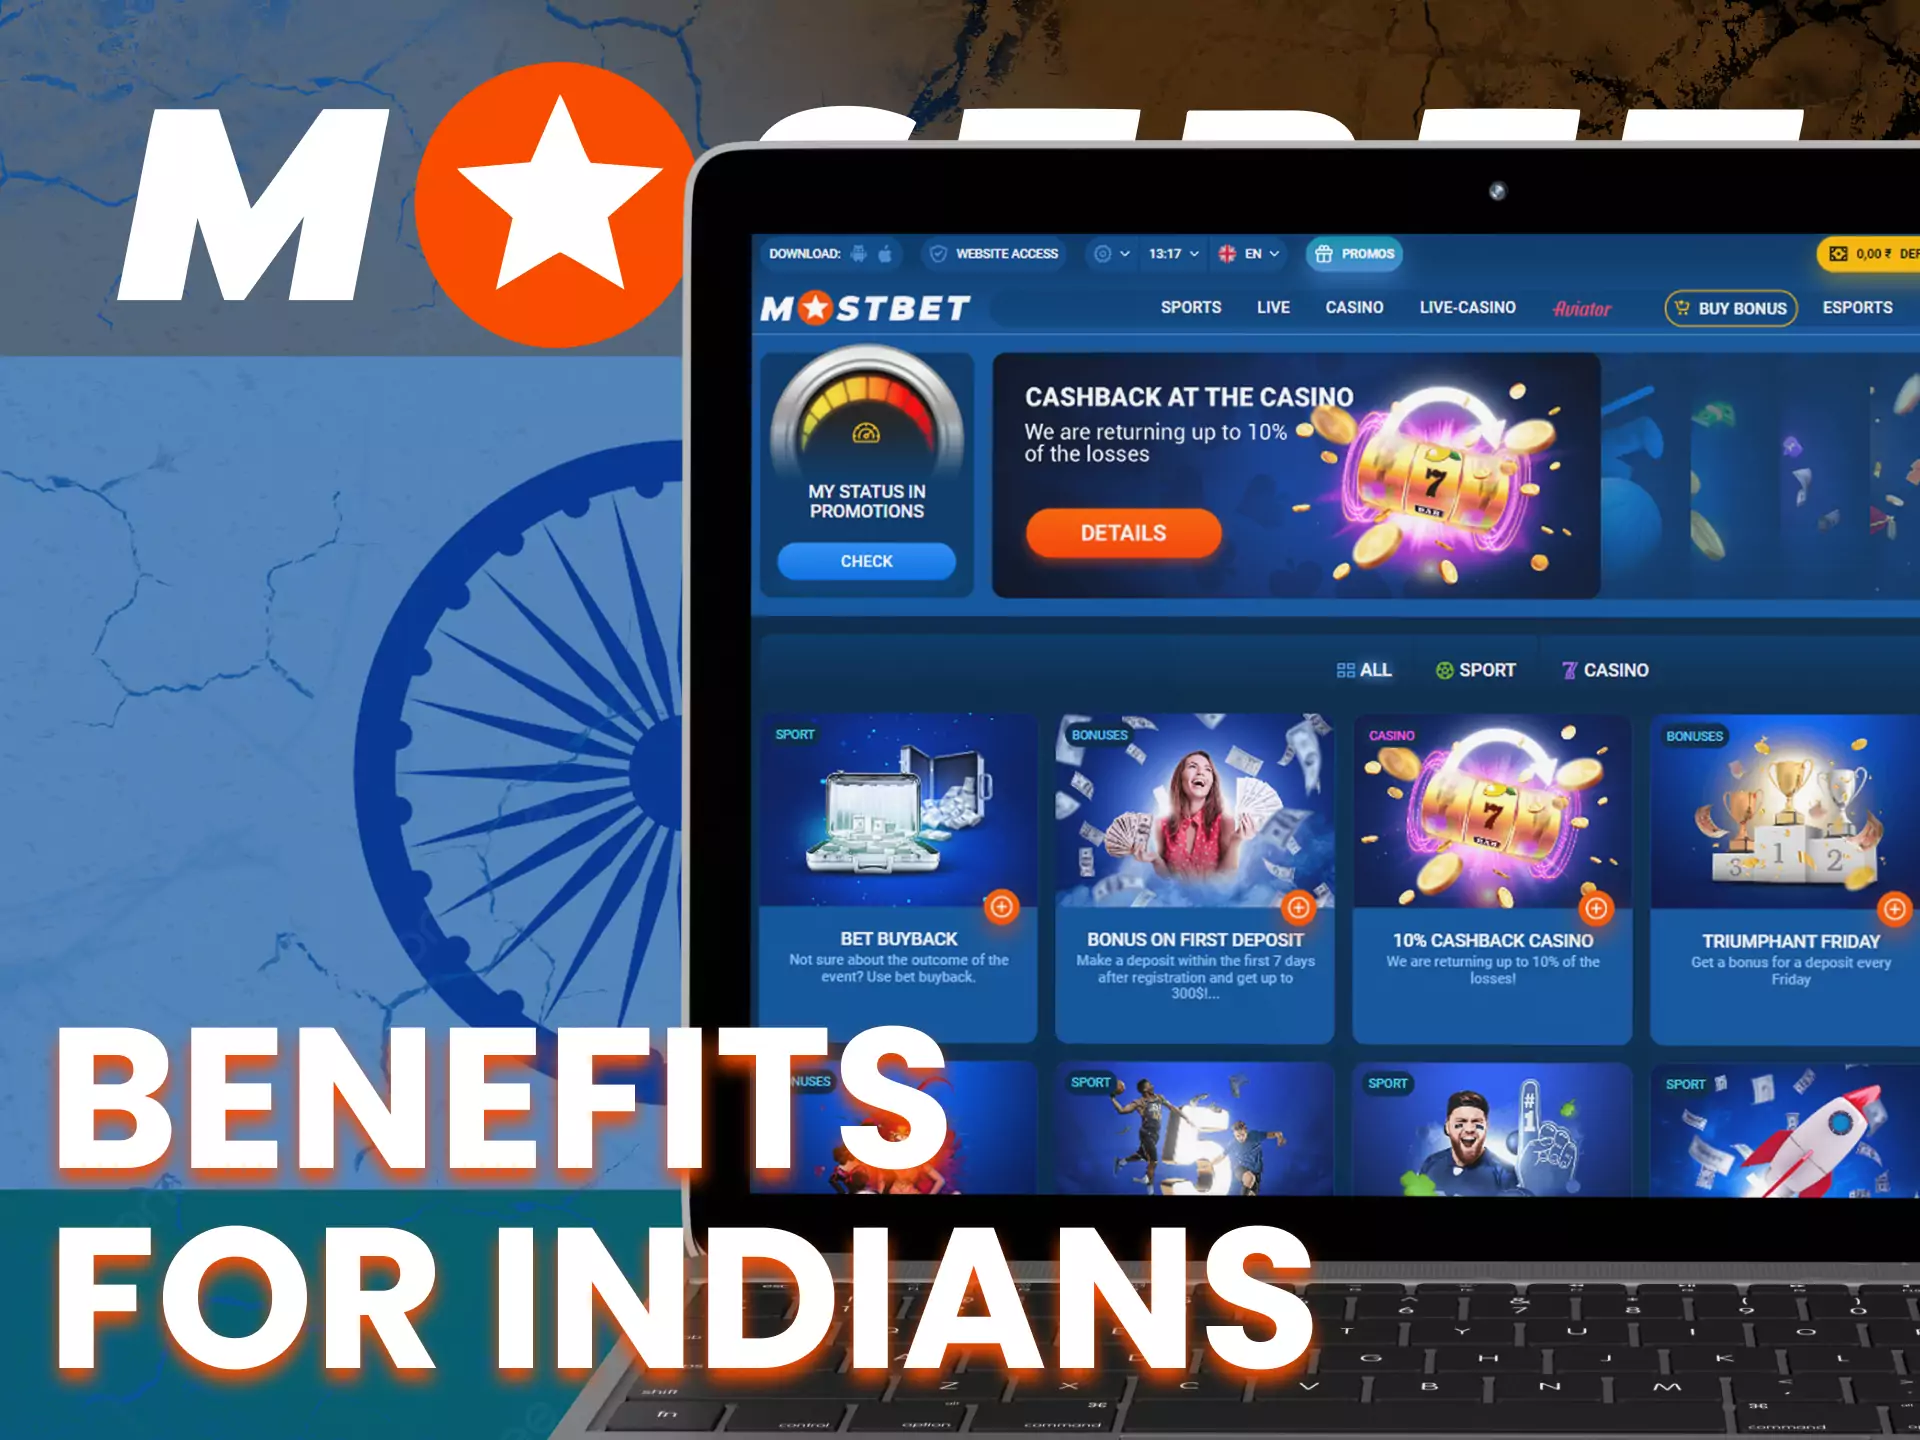 Mostbet perdostalet its players from India a lot of bonuses and benefits.